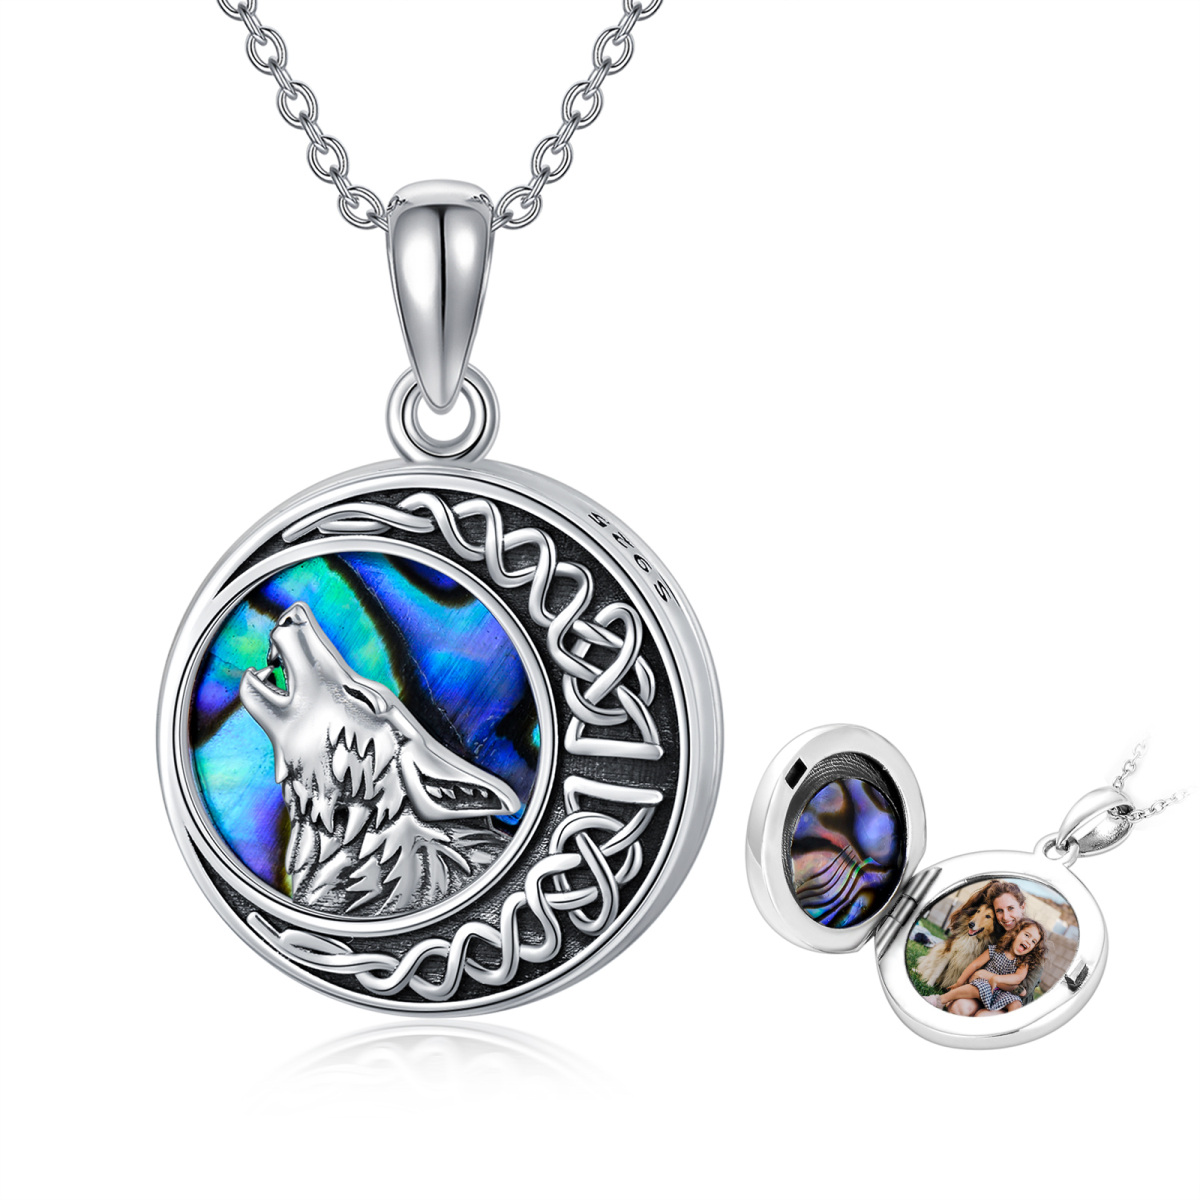 Collier en argent Abalone Shellfish Wolf & Celtic Knot & Moon Circular Shaped Personalized Photo Locket Necklace with Engraved Word (en anglais seulement)-1